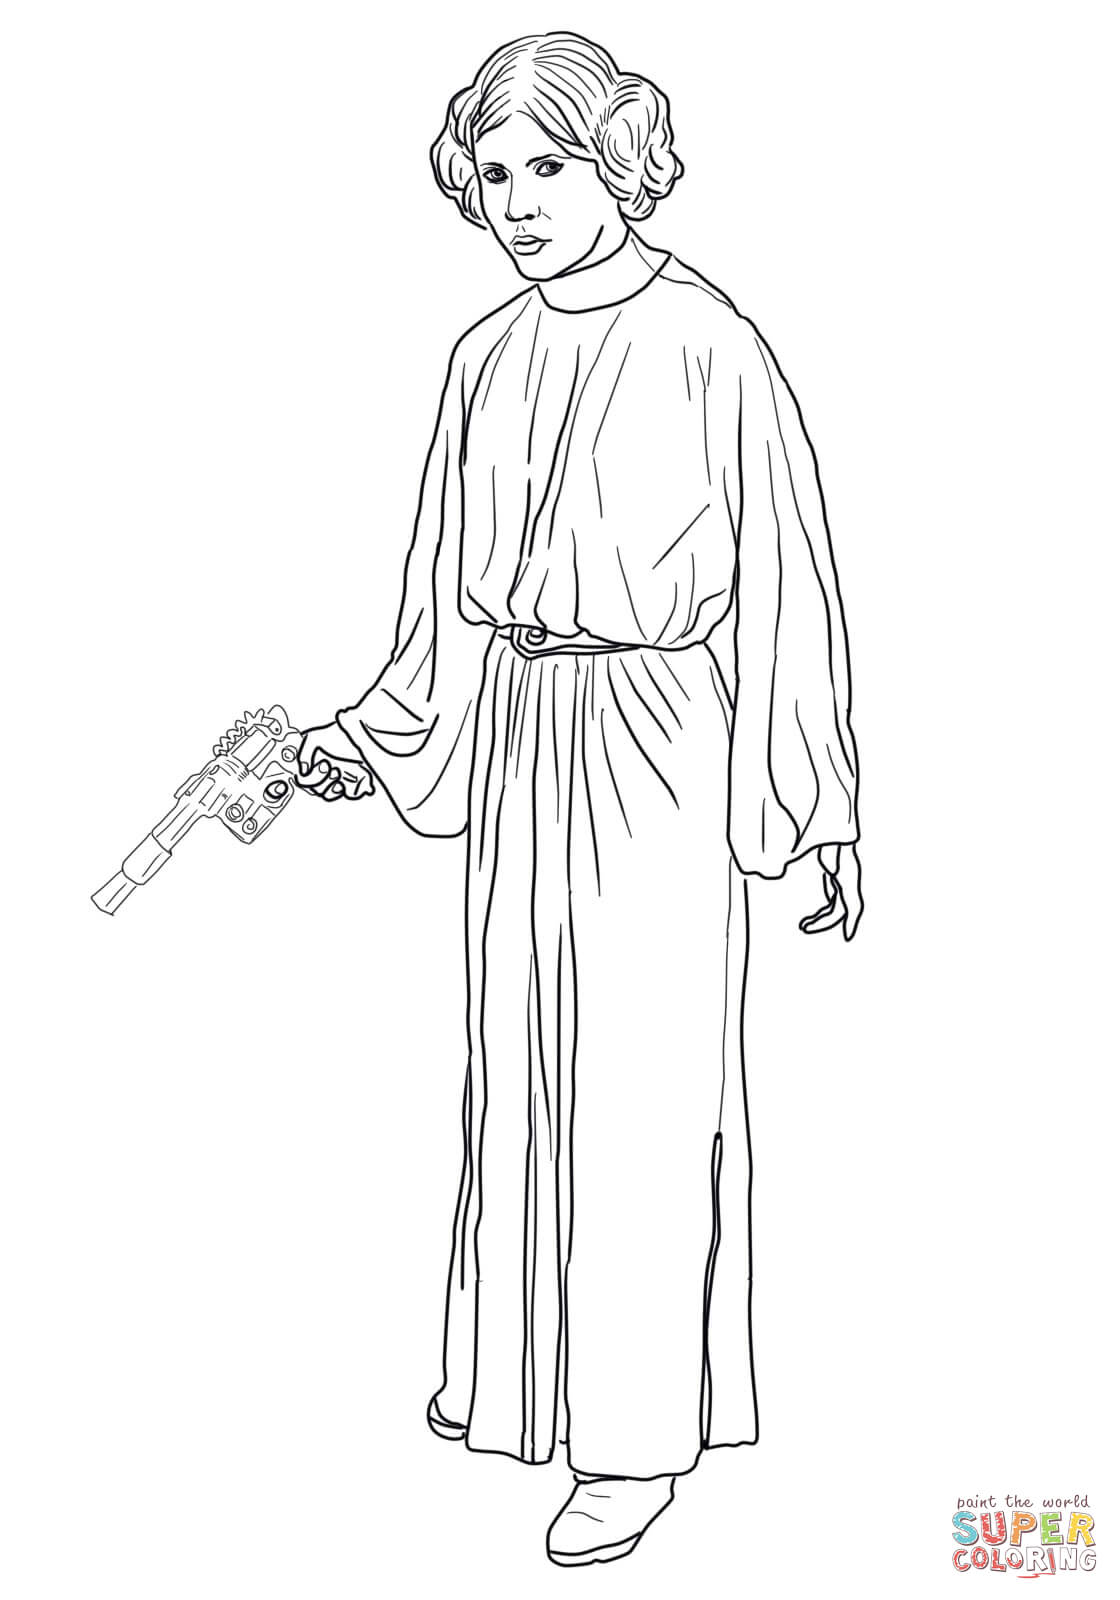 Princess Leia coloring page | Free Printable Coloring Pages